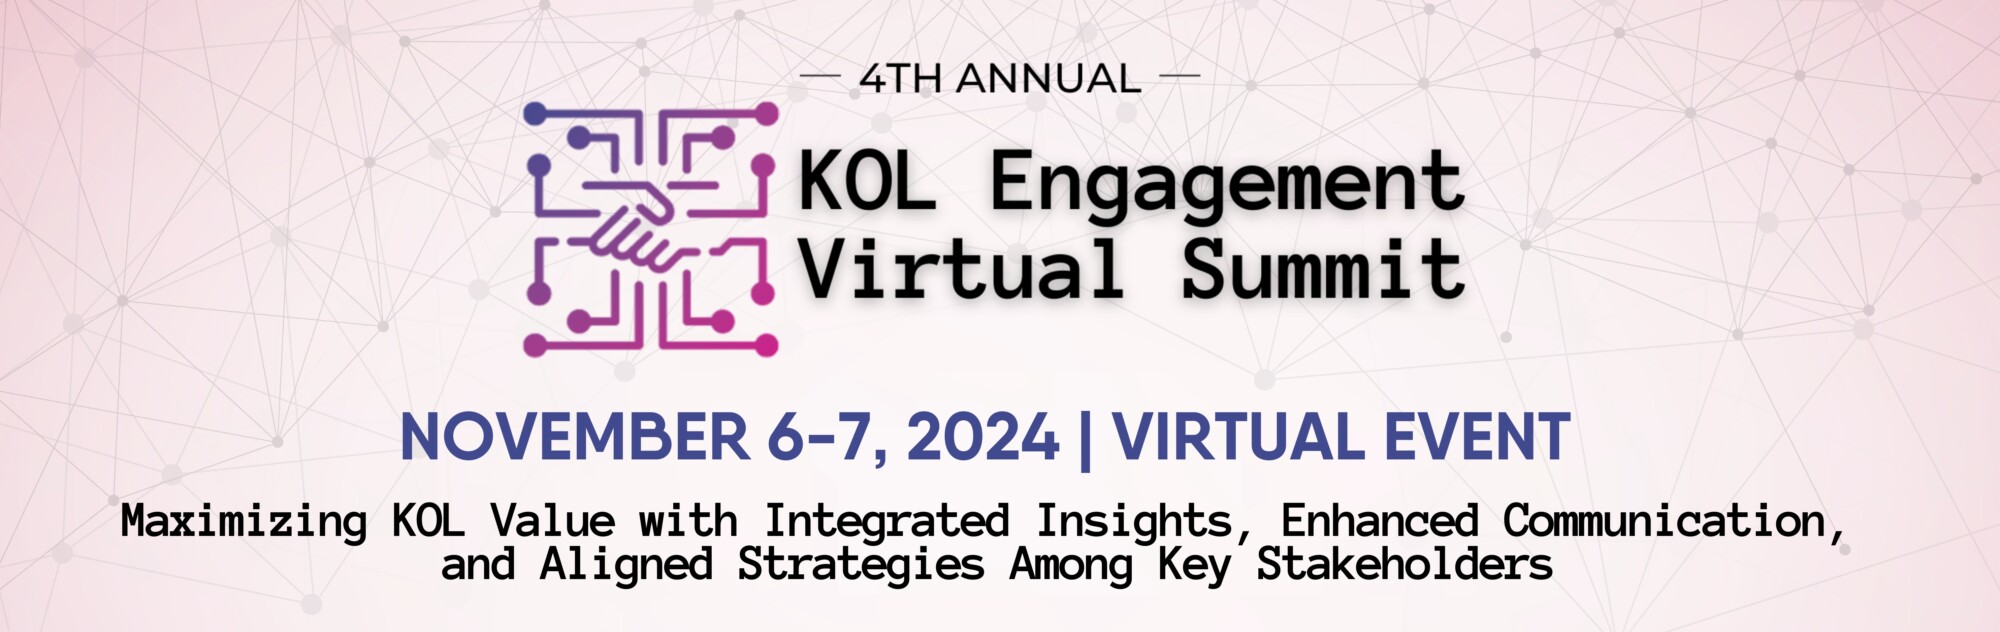 4th Annual Kol Engagement Virtual Summit, November 6-7, 2024 | Virtual Event. Maximizing KOL Value with Integrated Insights, Enhanced Communication, and Aligned Strategies Among Key Stakeholders